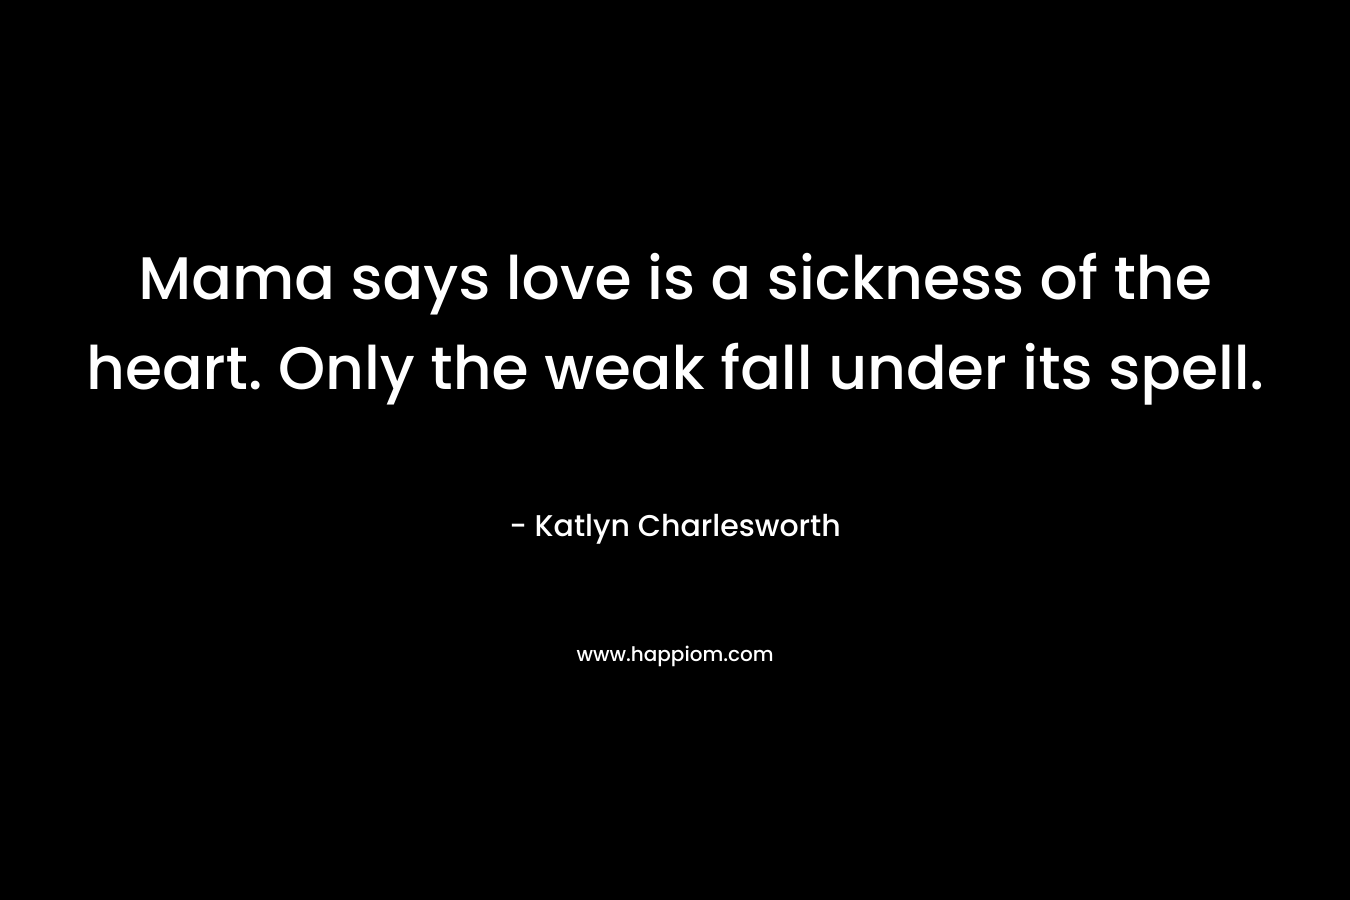 Mama says love is a sickness of the heart. Only the weak fall under its spell. – Katlyn Charlesworth